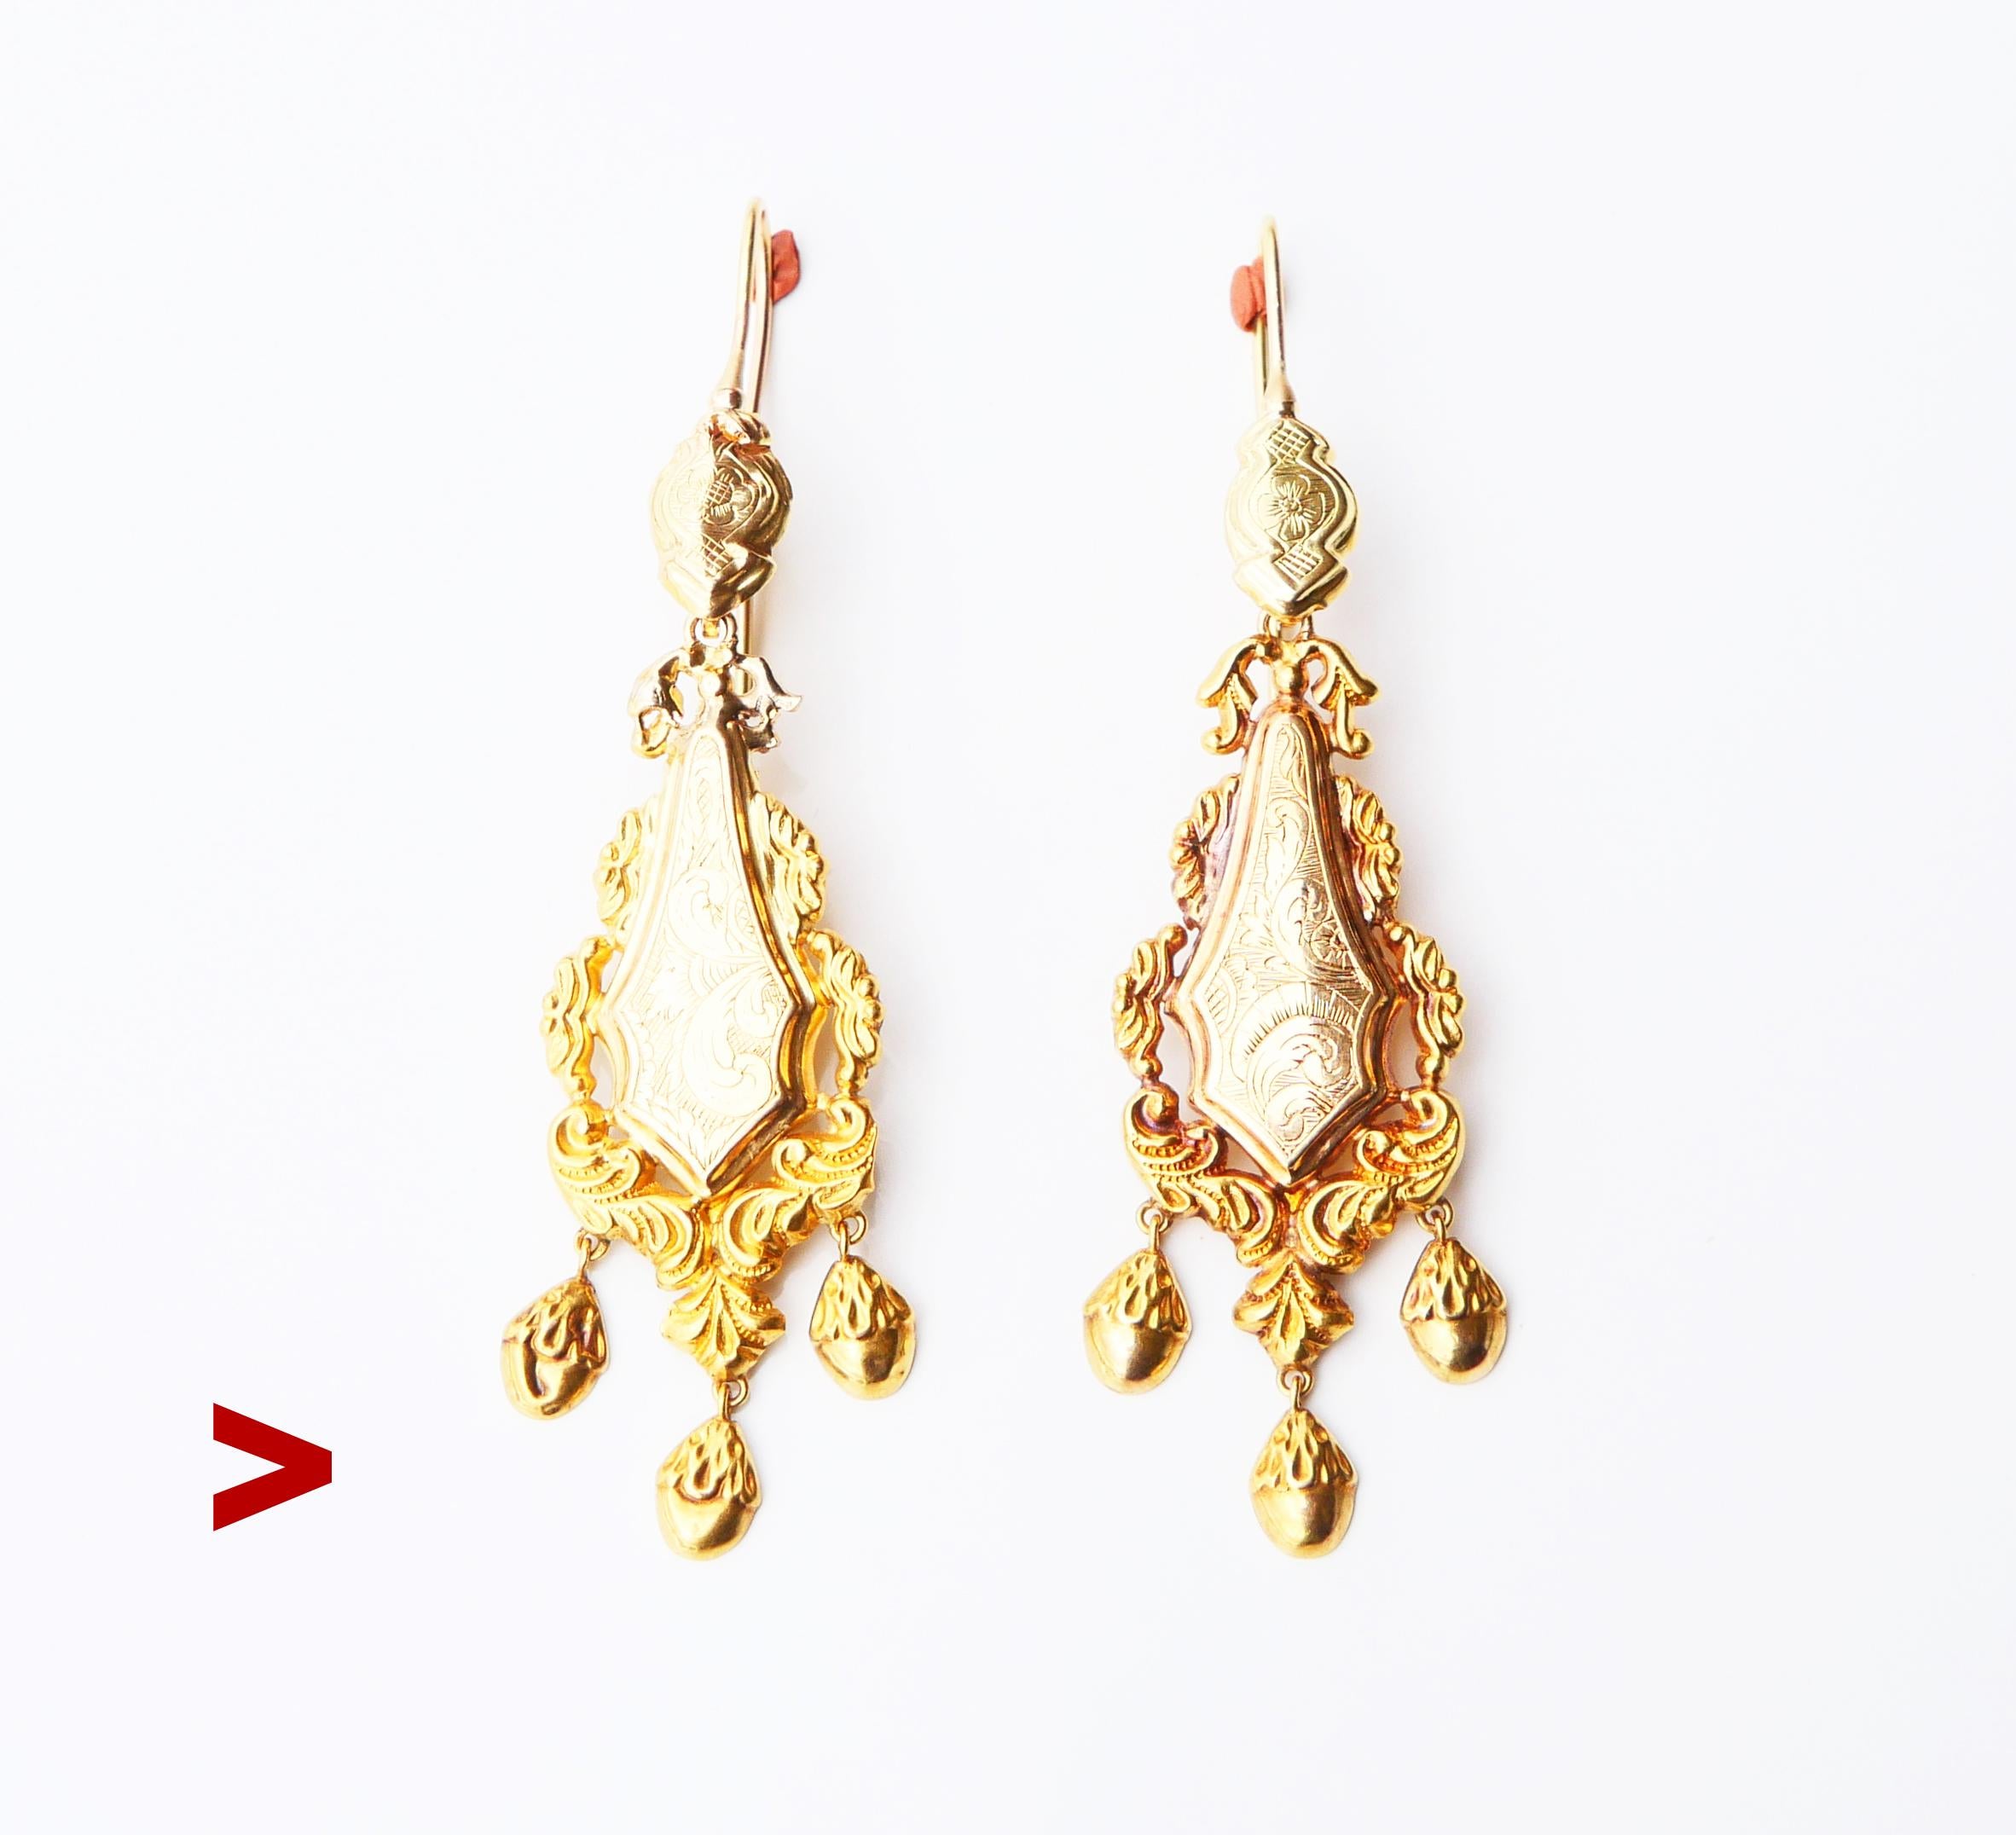 A pair of antique 18K Yellow Gold earrings with drop-shaped pendants and delicate hand-engraved floral ornaments.

Freely suspended dangles are hollow inside.

Swedish hallmarks on both marked 18K Gold.

Maker's marks unknown to me /worn, city of